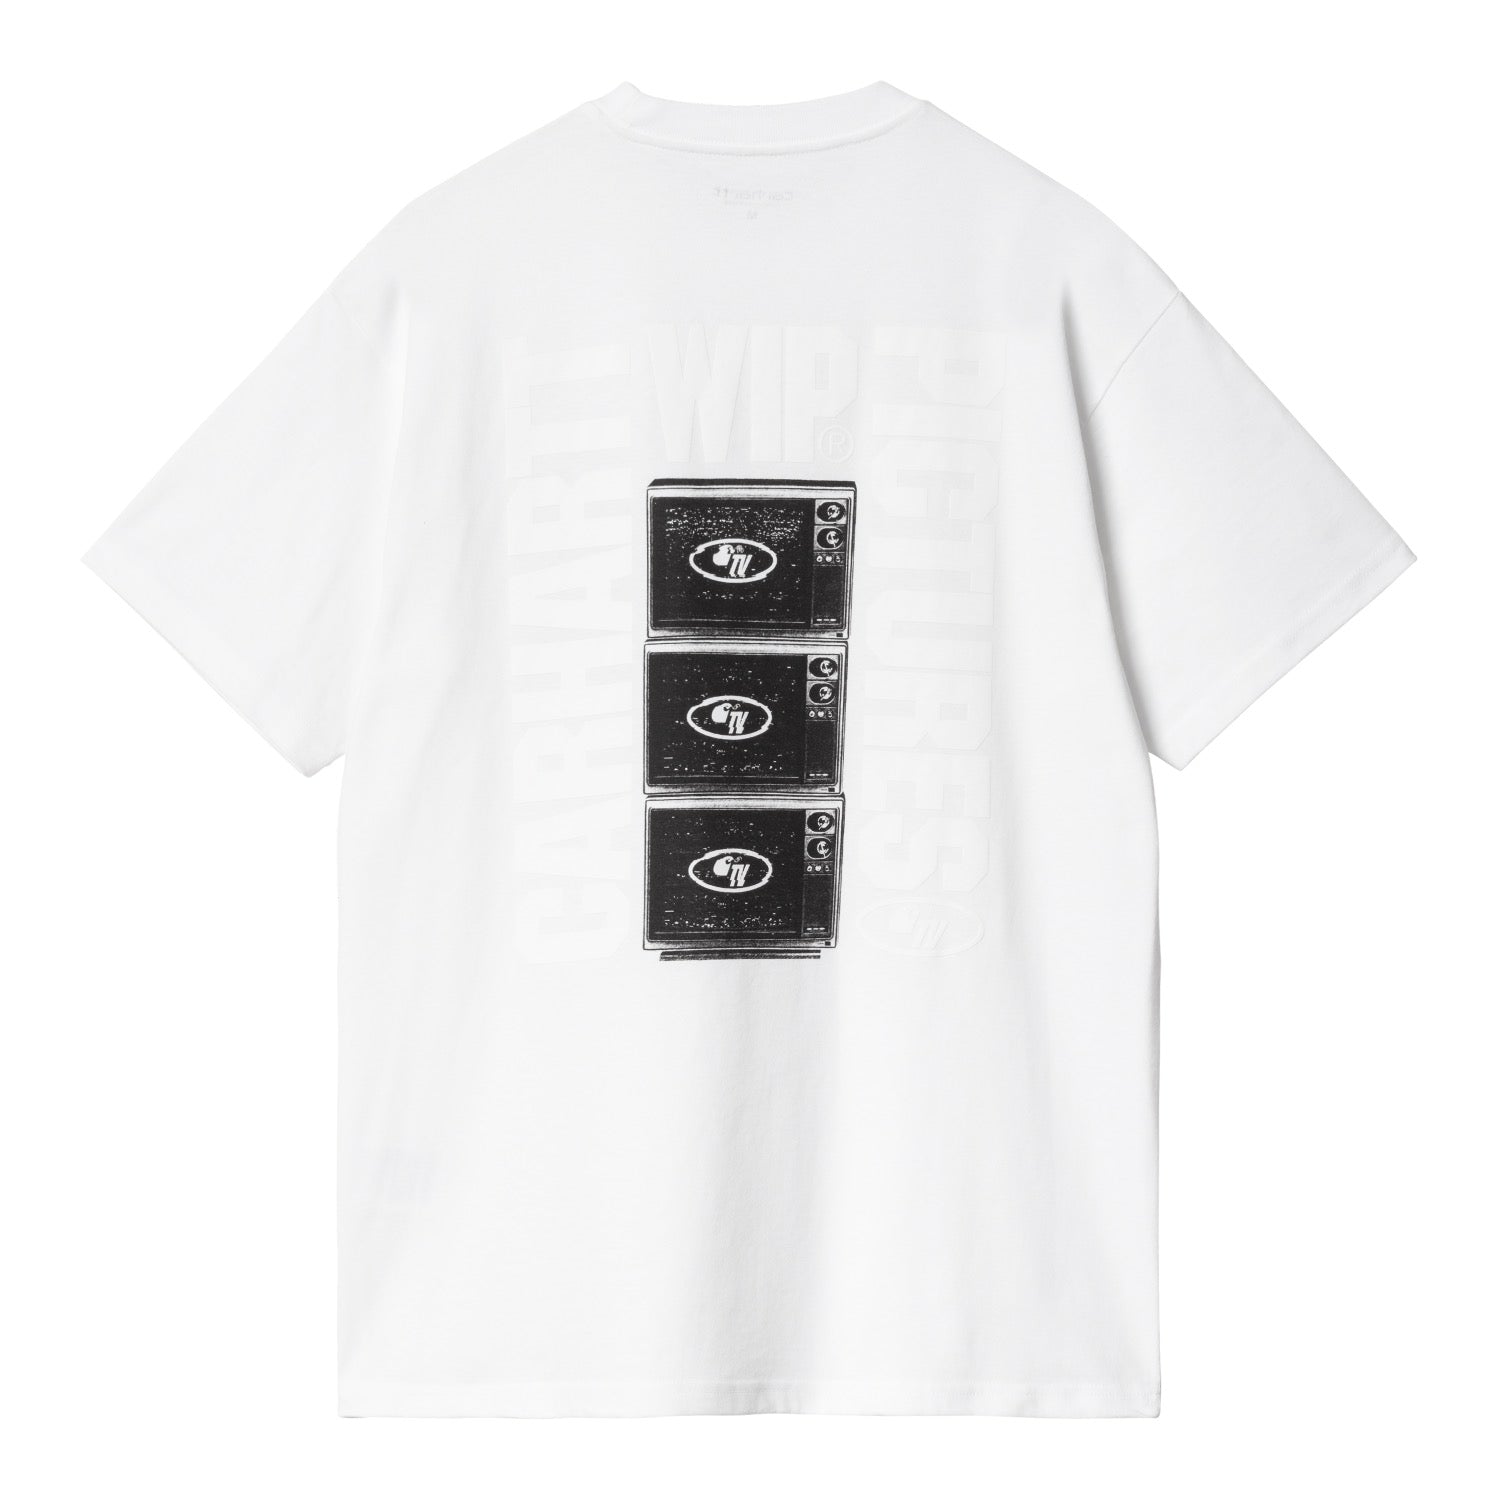 S/S WIP PICTURES T-SHIRT - White